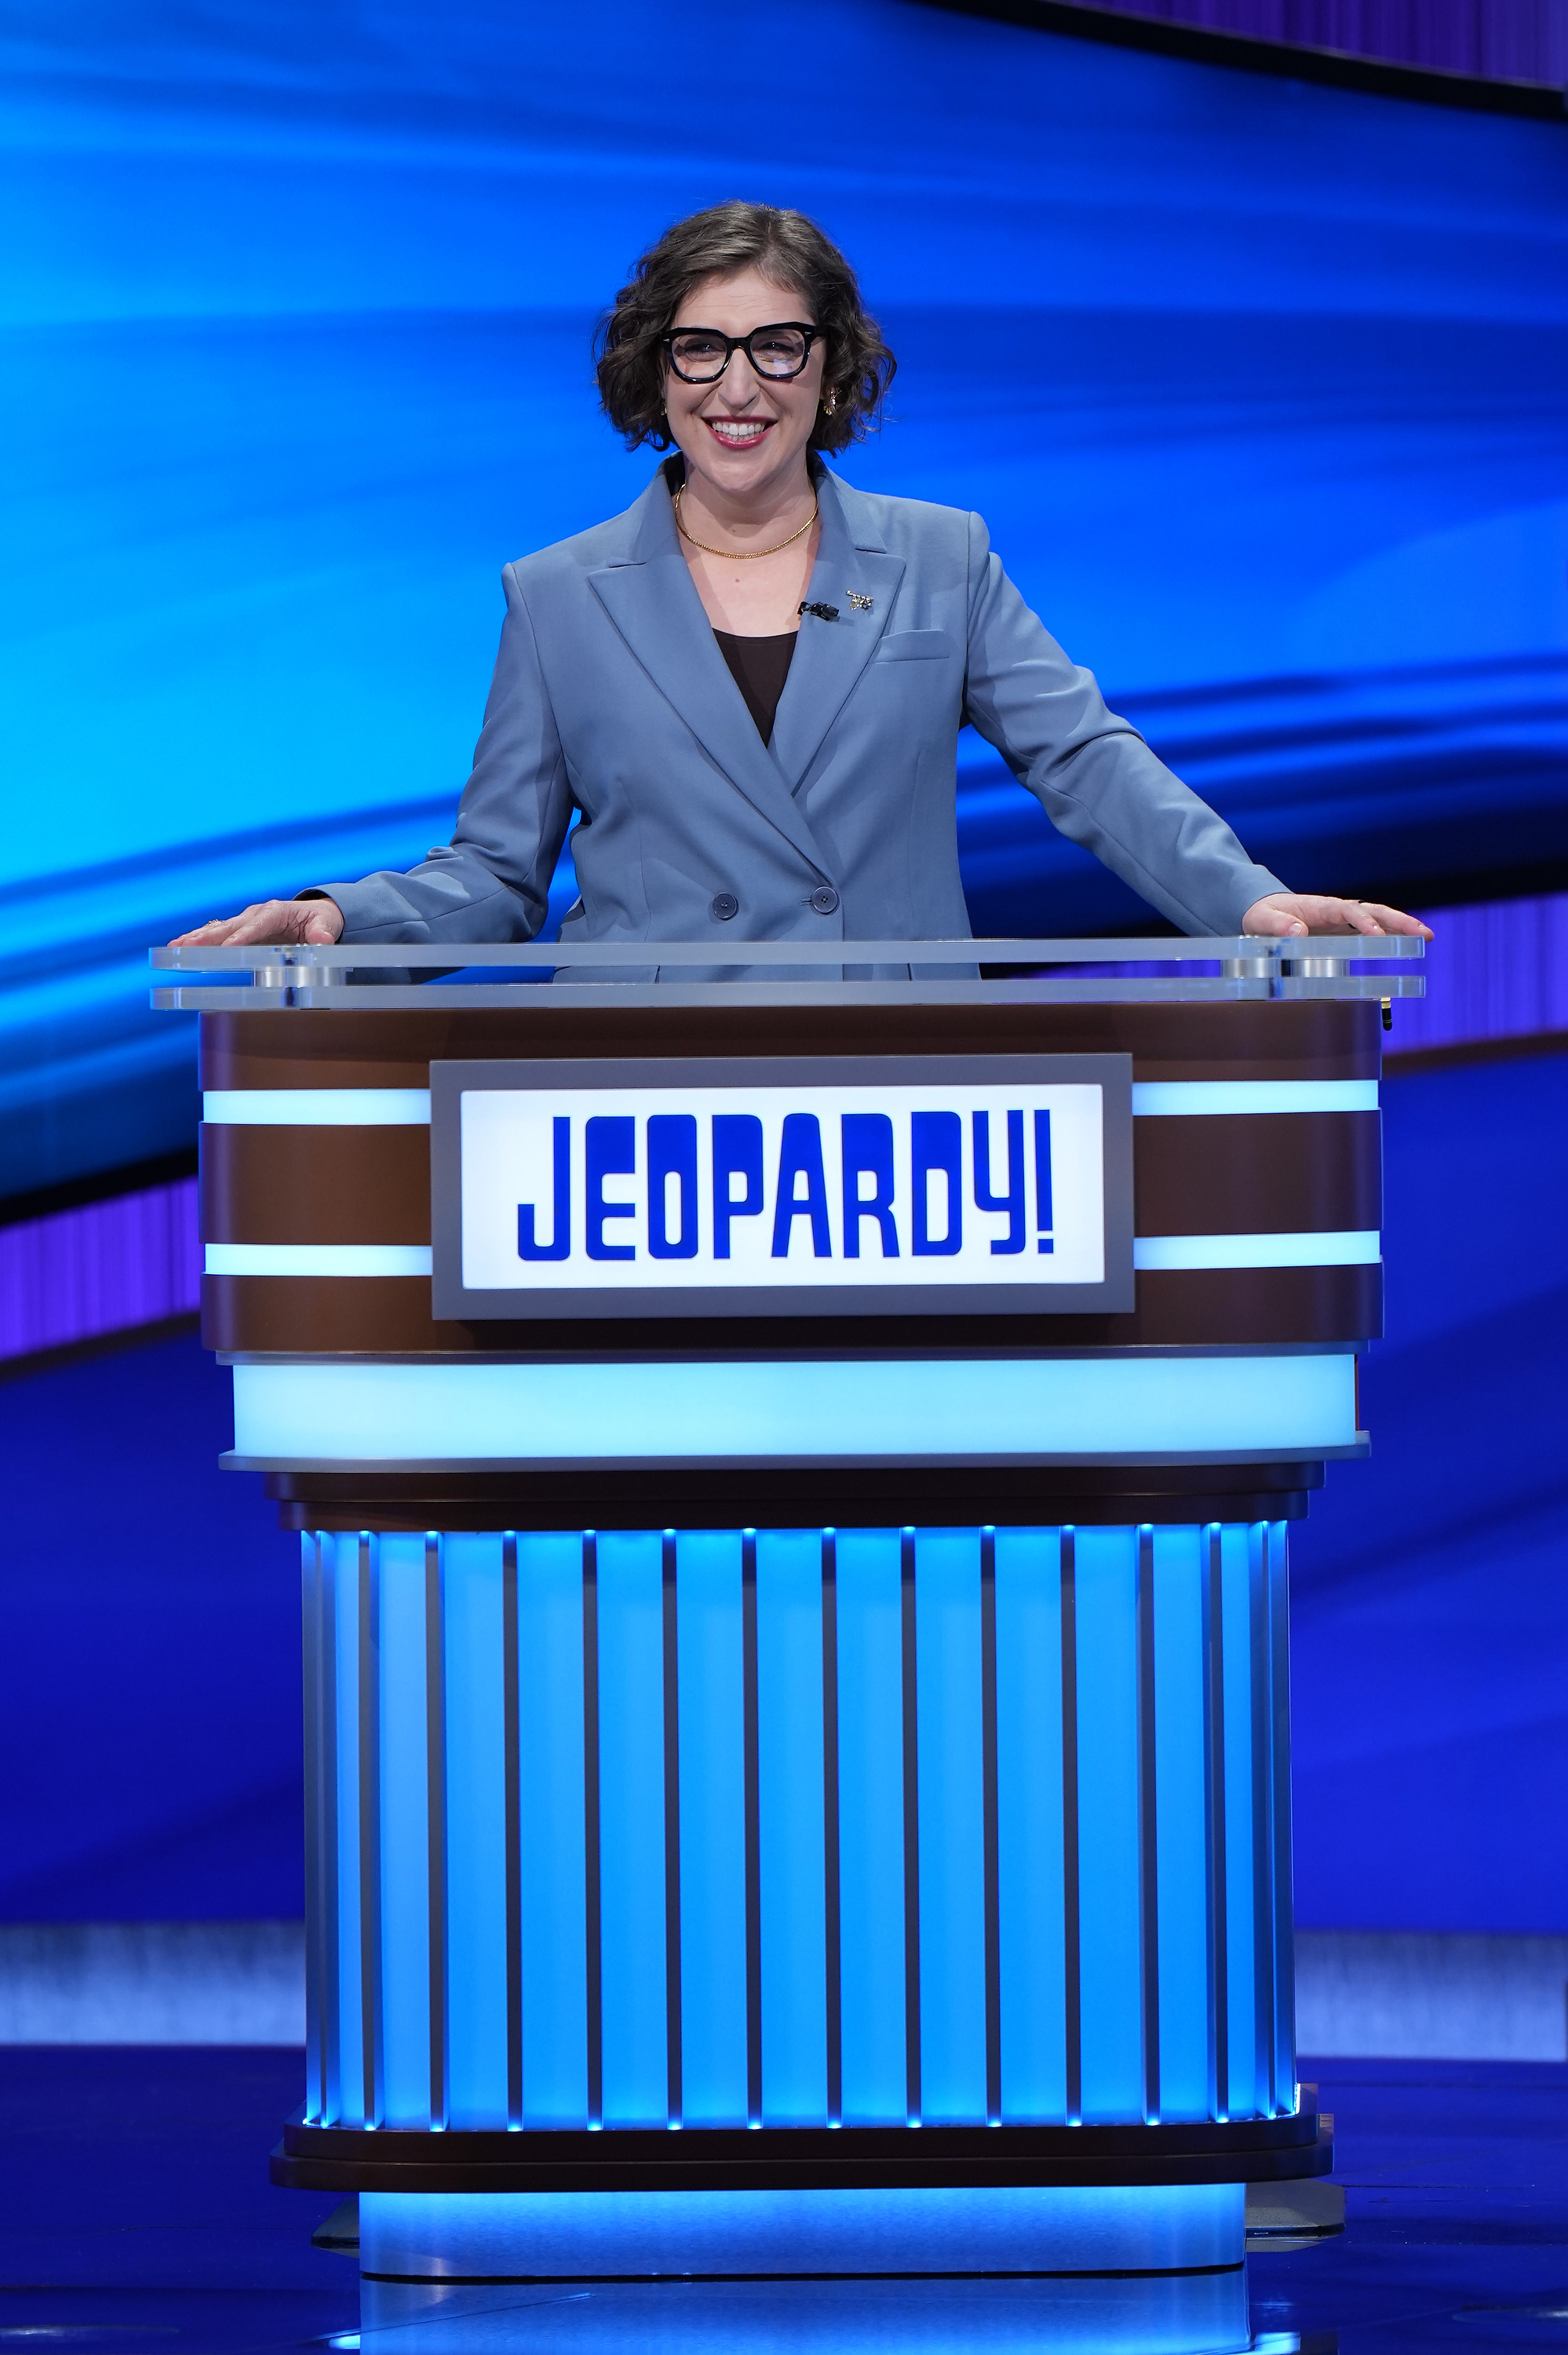 Jeopardy! later confirmed the news, saying they decided to only have one host, but Mayim may be back for primetime specials